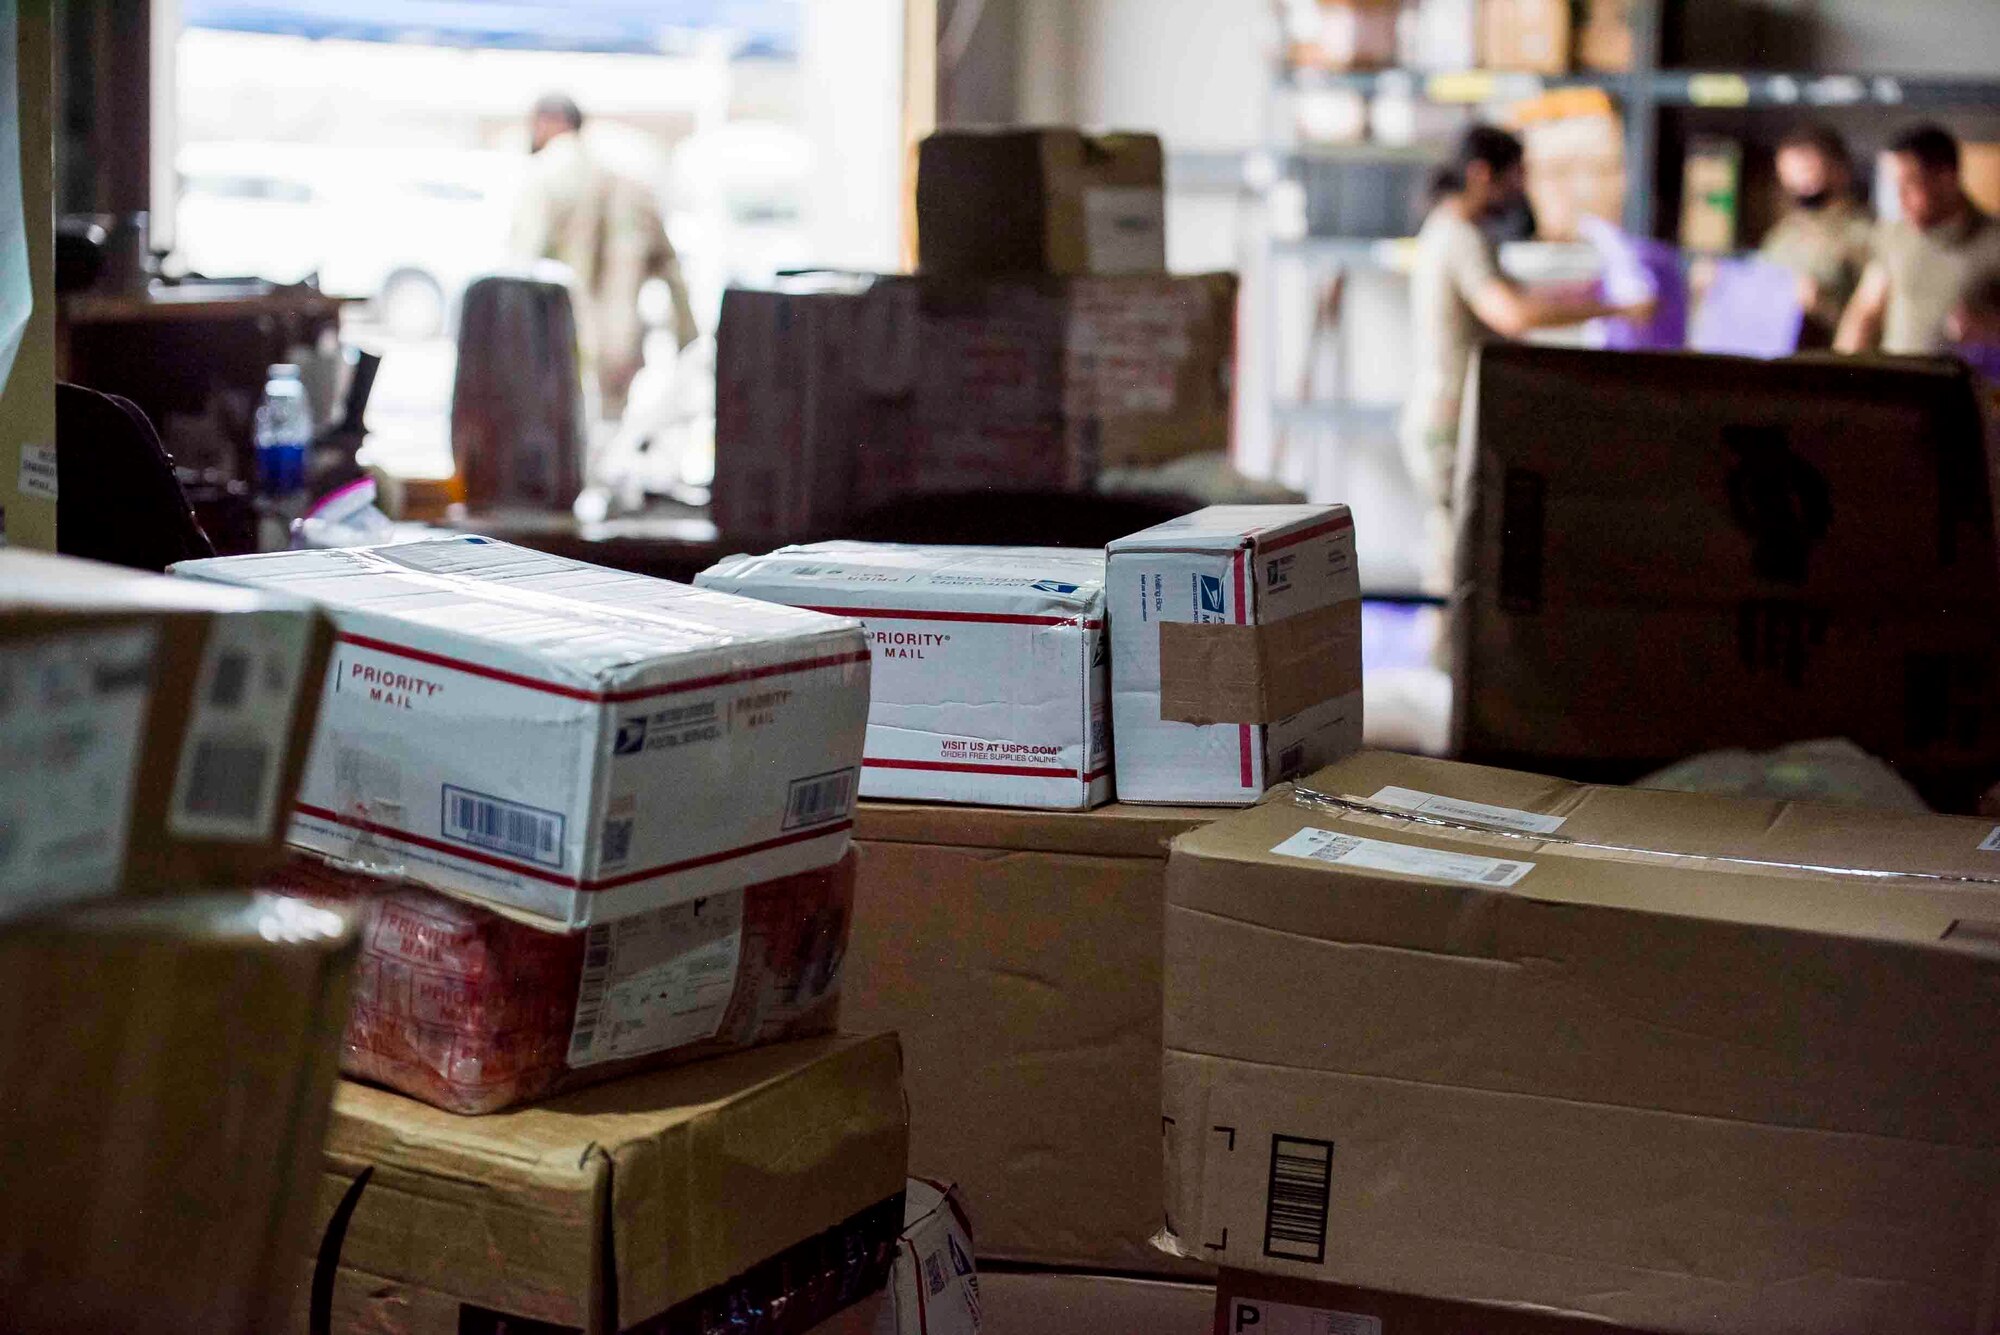 U.S. Air Force Airmen from the 380th Expeditionary Force Support Squadron, sort mail packages at Al Dhafra Air Base (ADAB), United Arab Emirates, June 16, 2021. The ADAB post office averages 52,000 lbs across 8,500 packages a month.